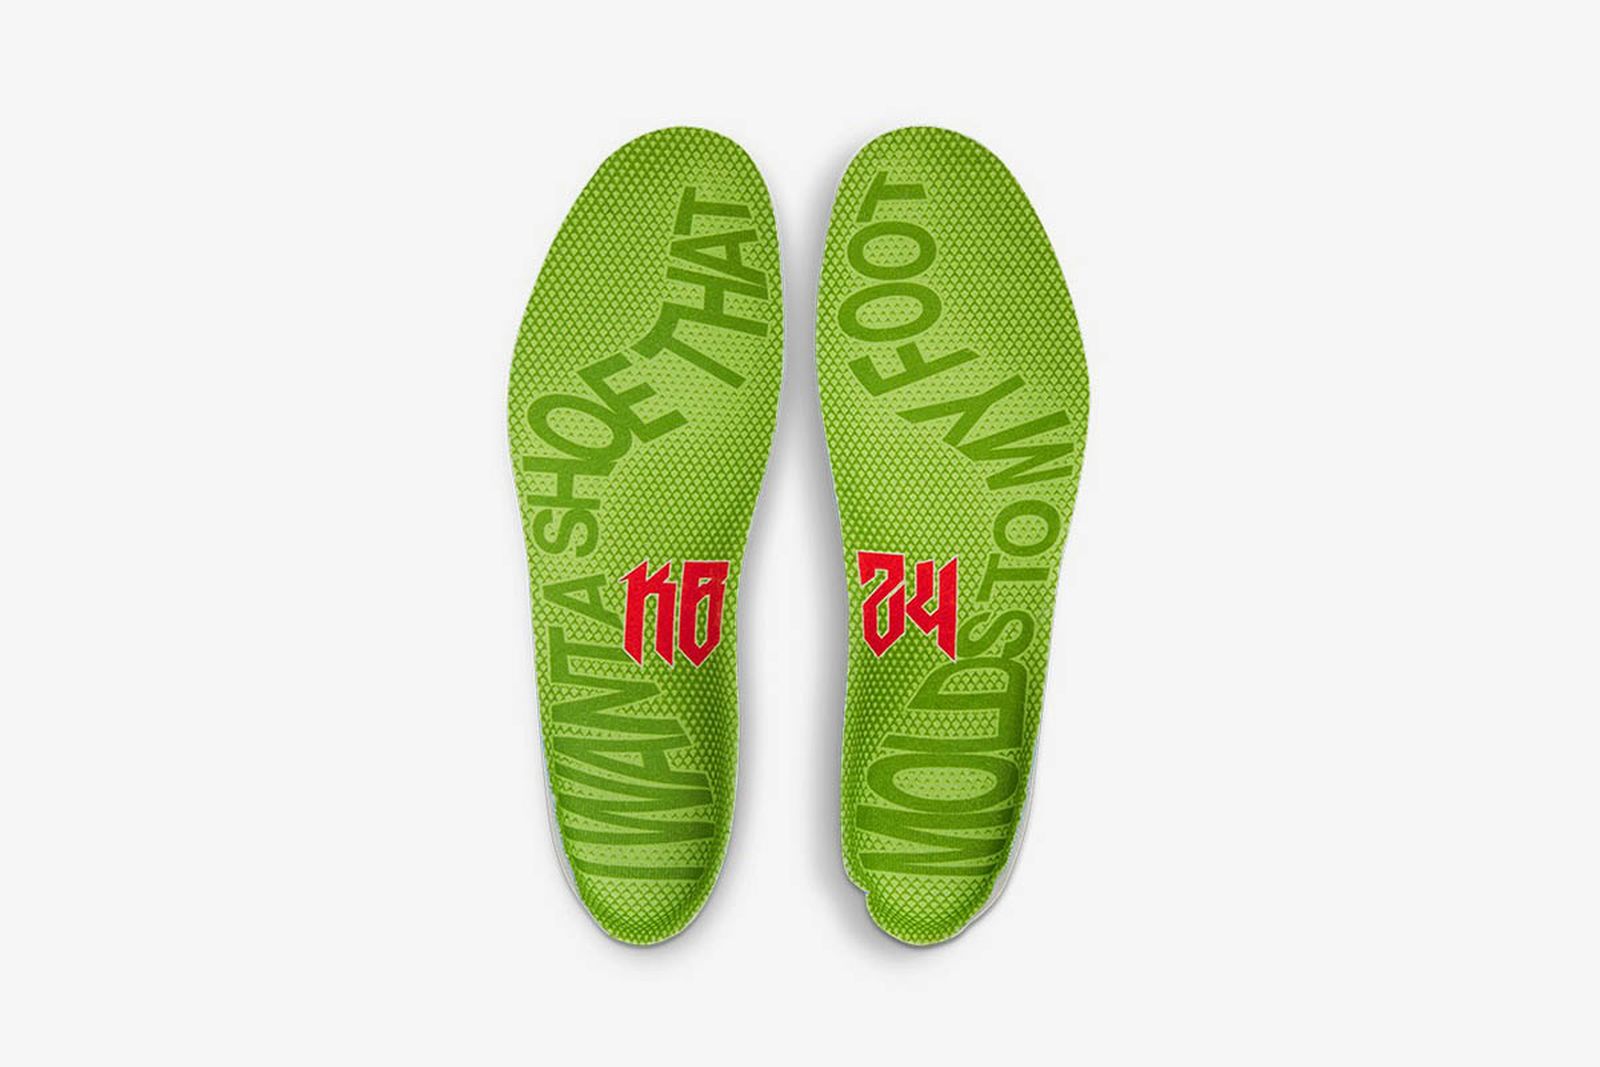 Nike Kobe 6 Protro "Grinch": Images & Where to Buy Today